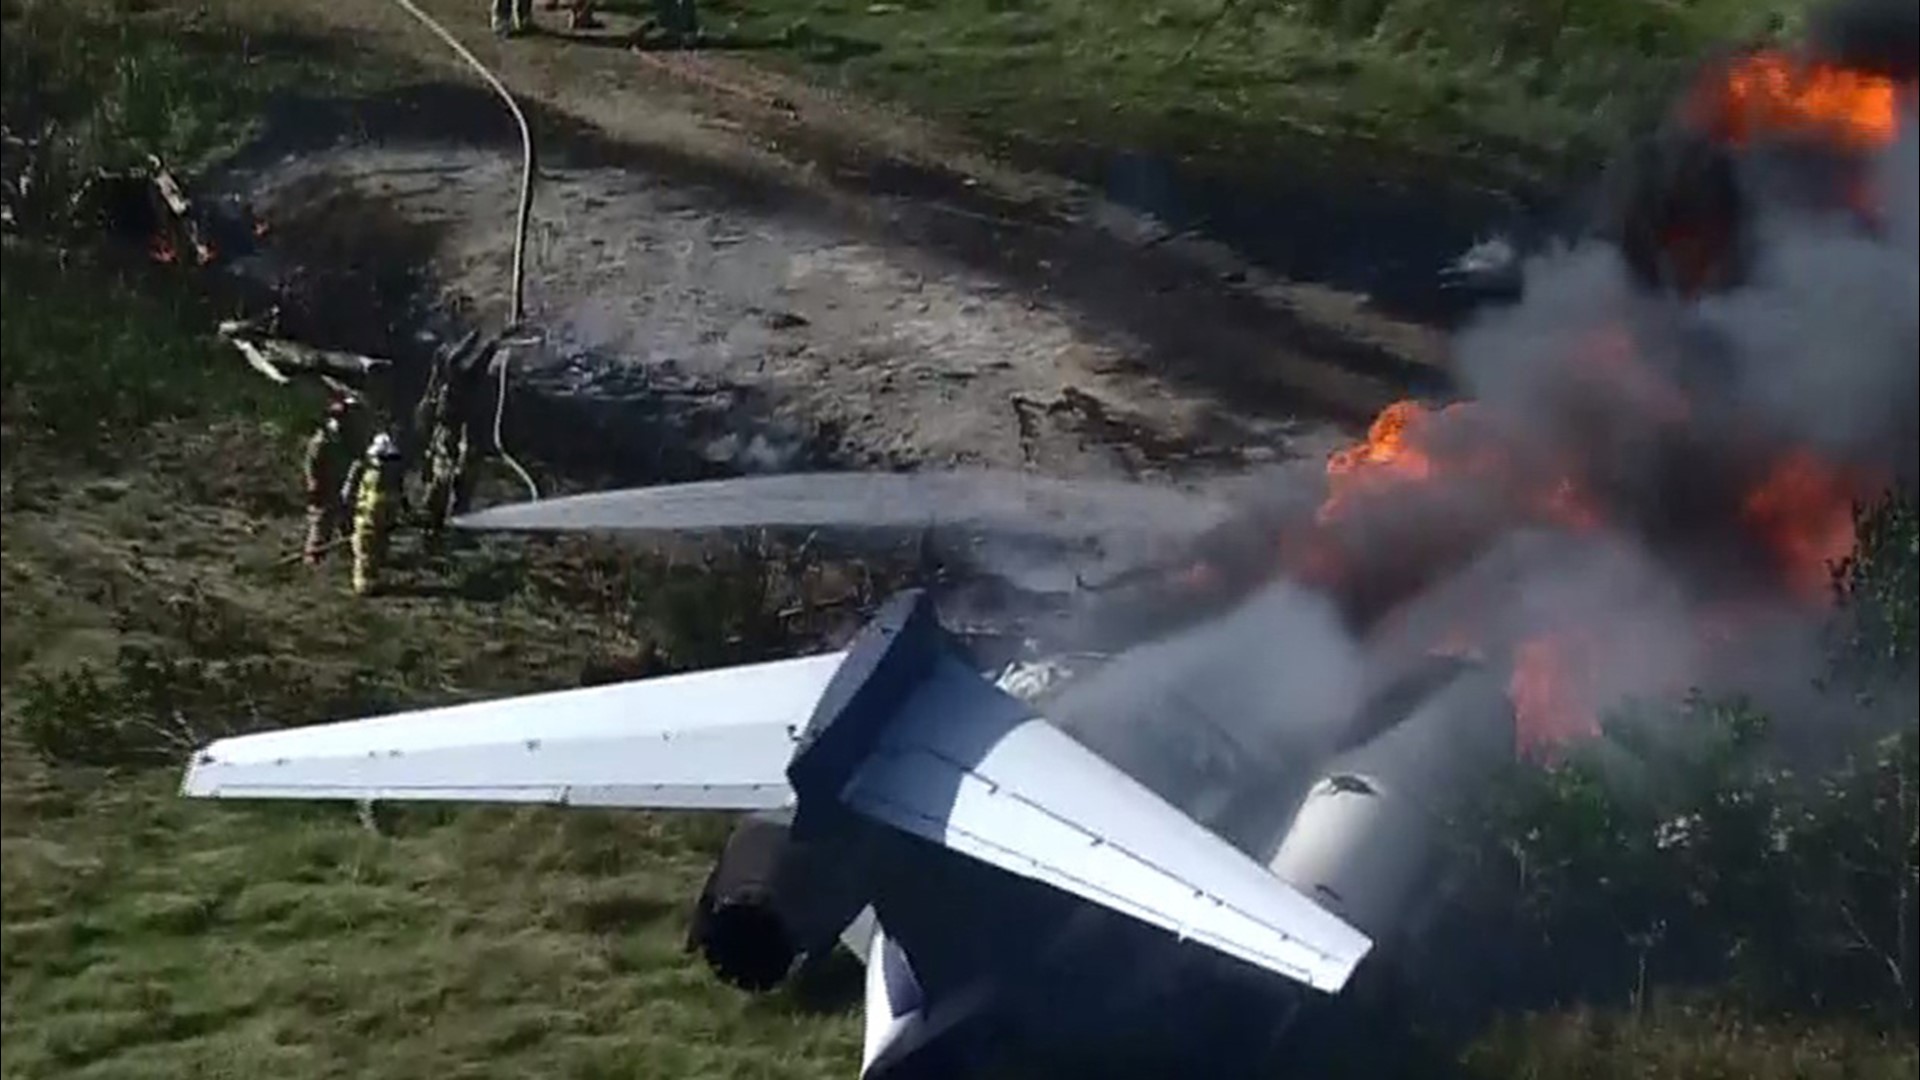 No serious injuries were reported after a plane went down and caught fire in Waller County Tuesday morning.